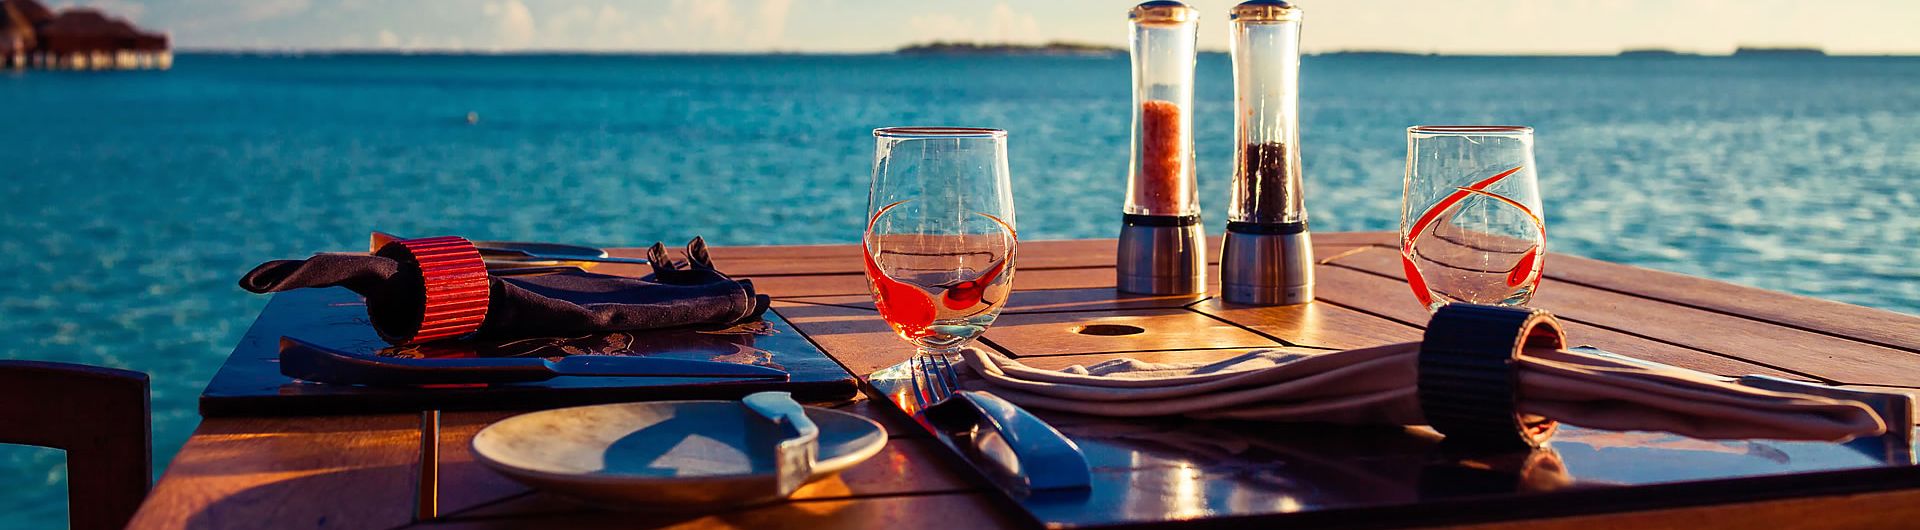 Table setting overlooking lake at sunset